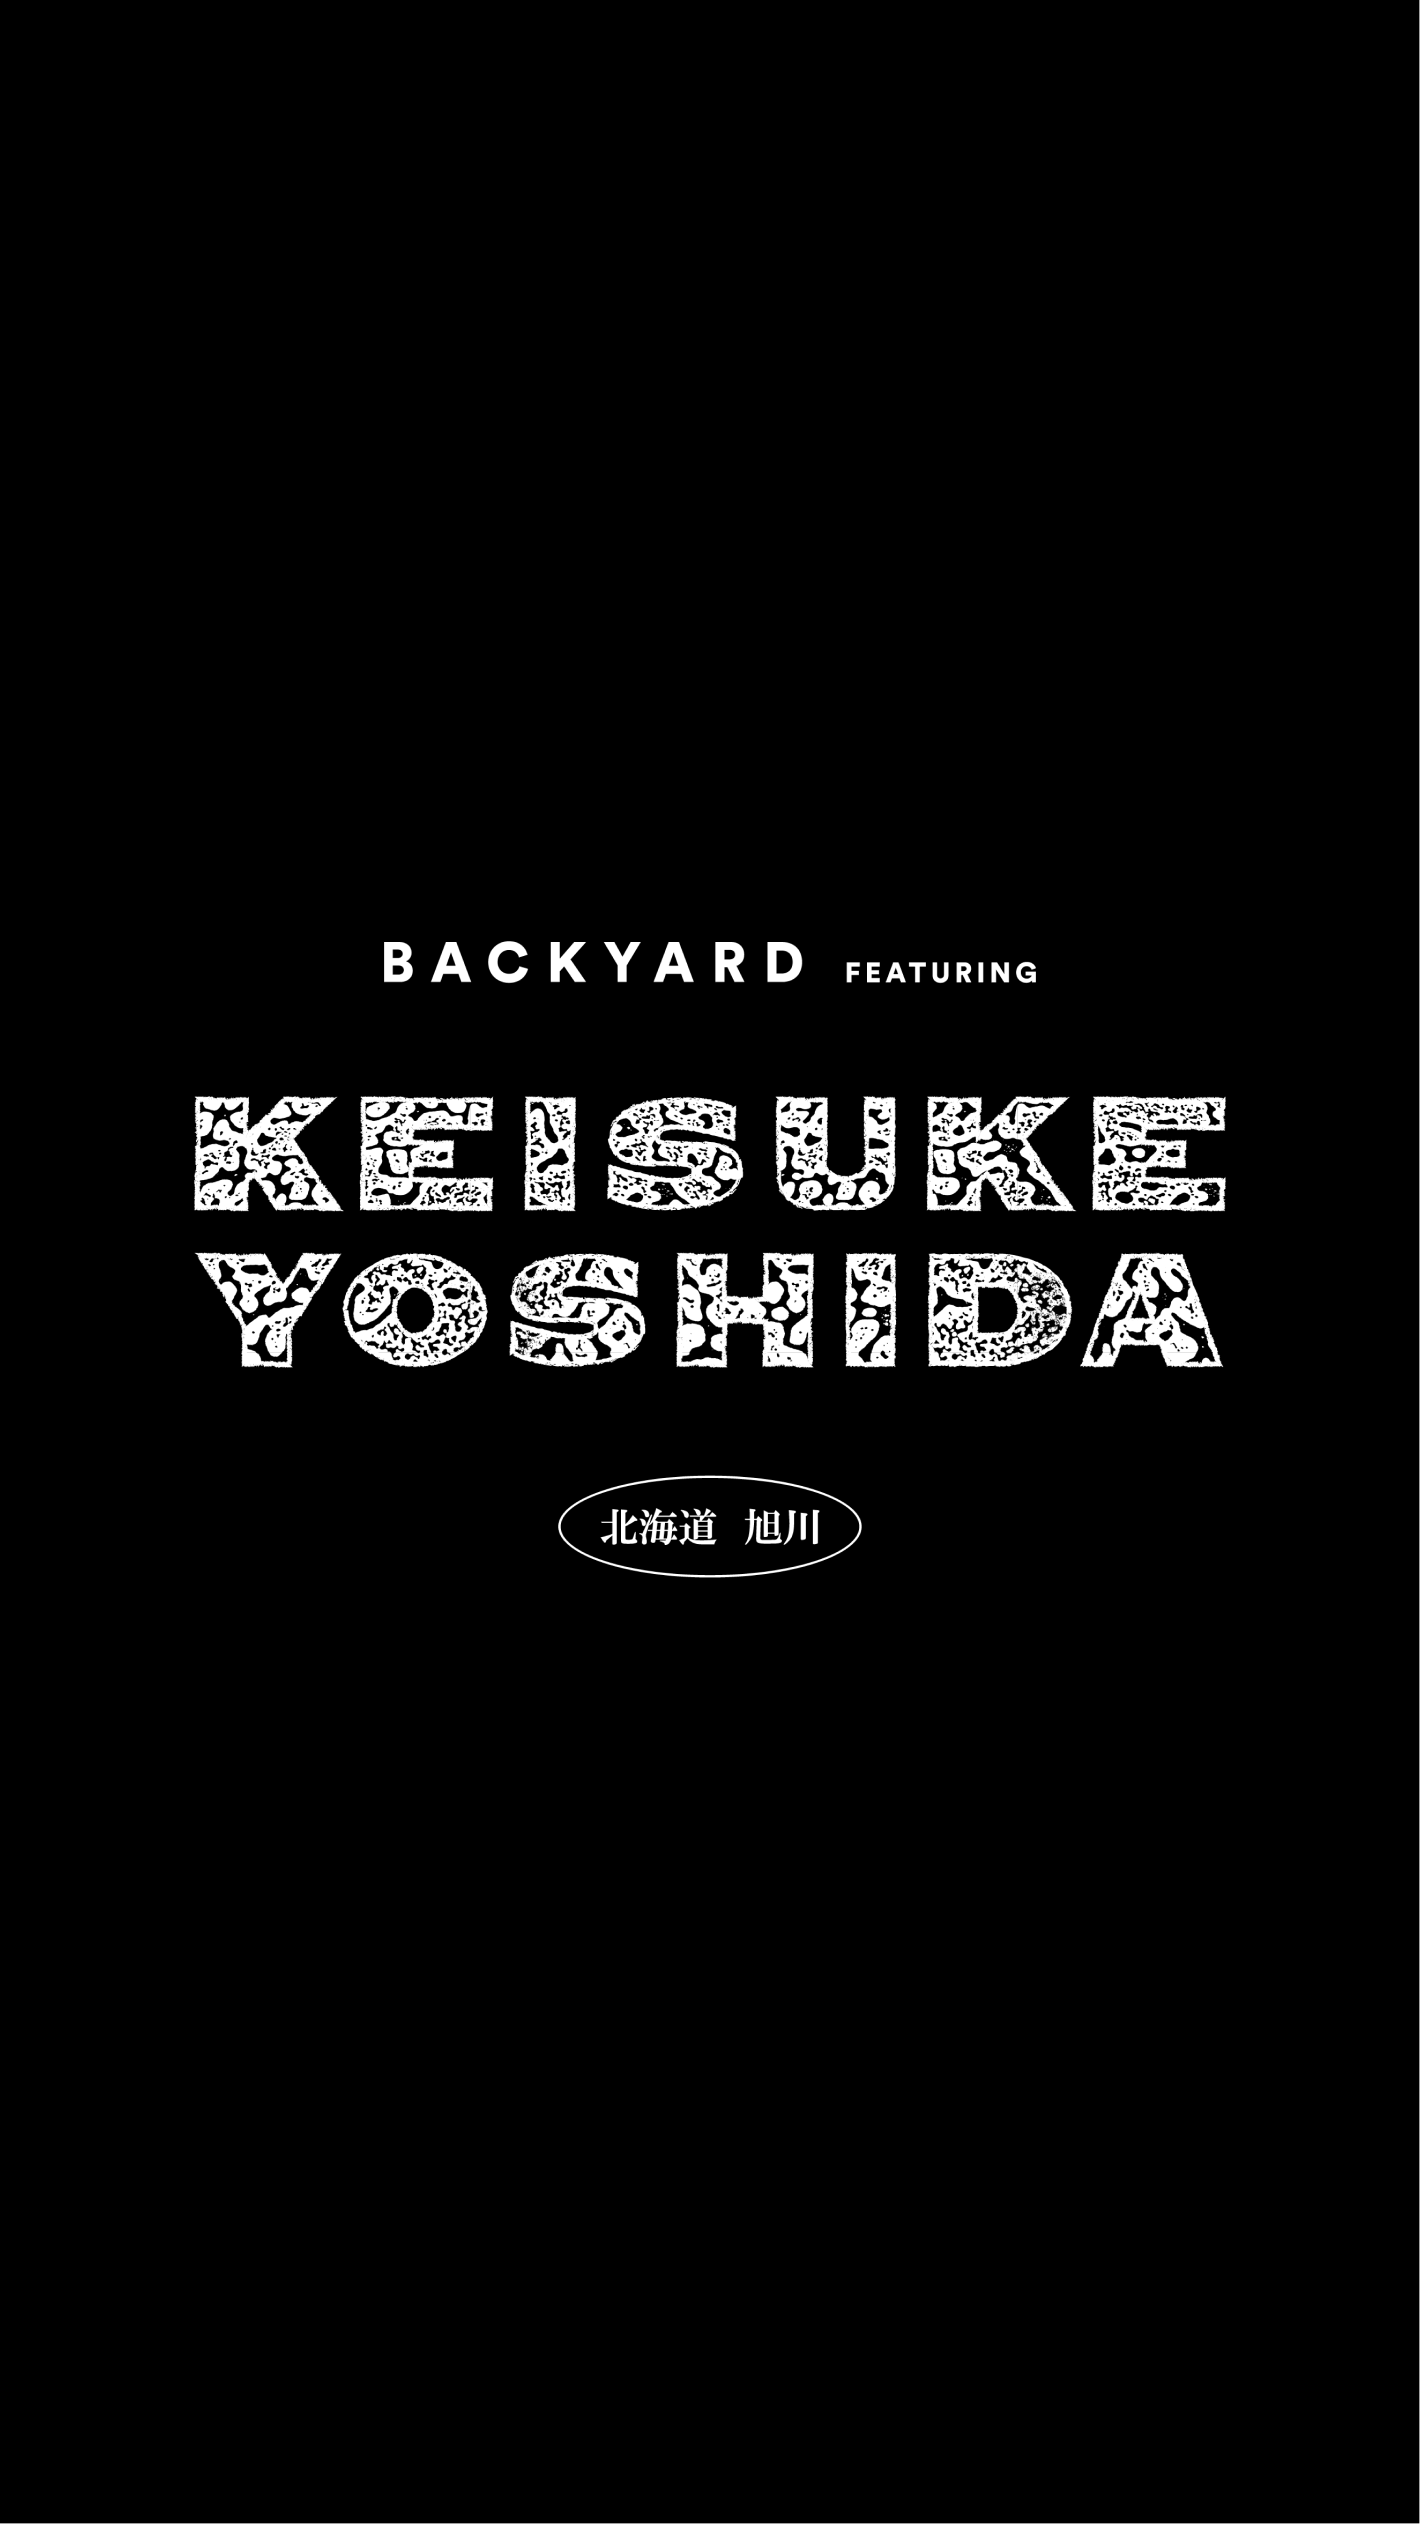 BACKYARD title card / Watch the film now.